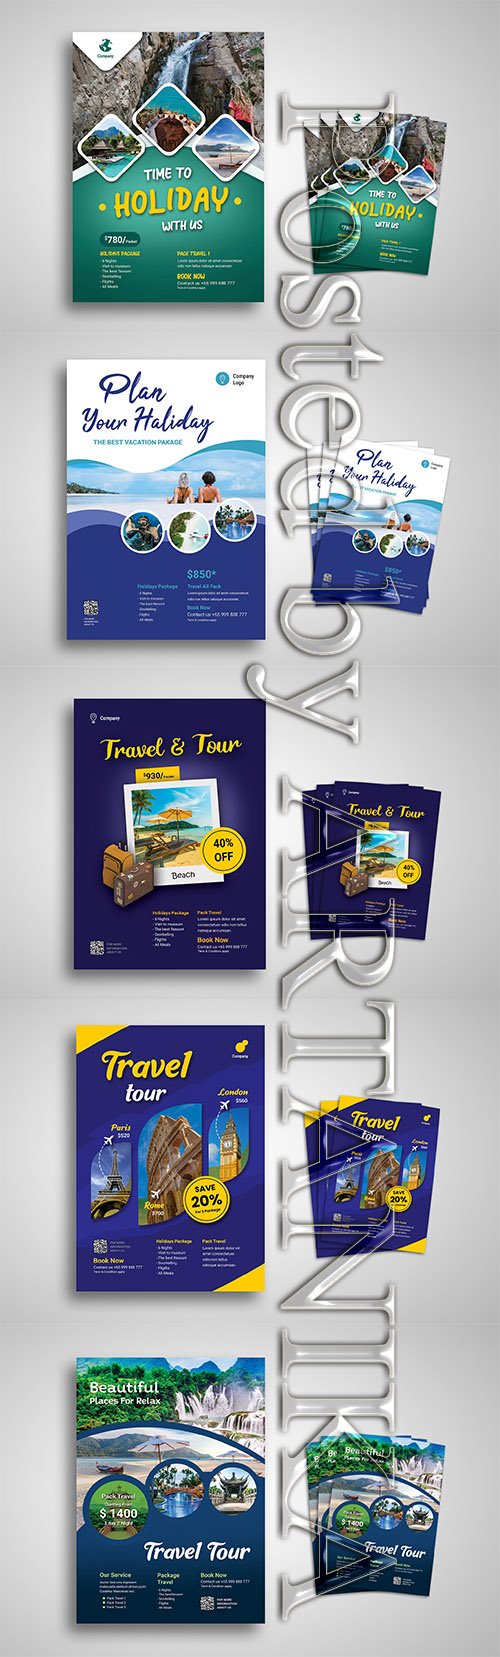 Travel and Tour Flyer Promo Template Set